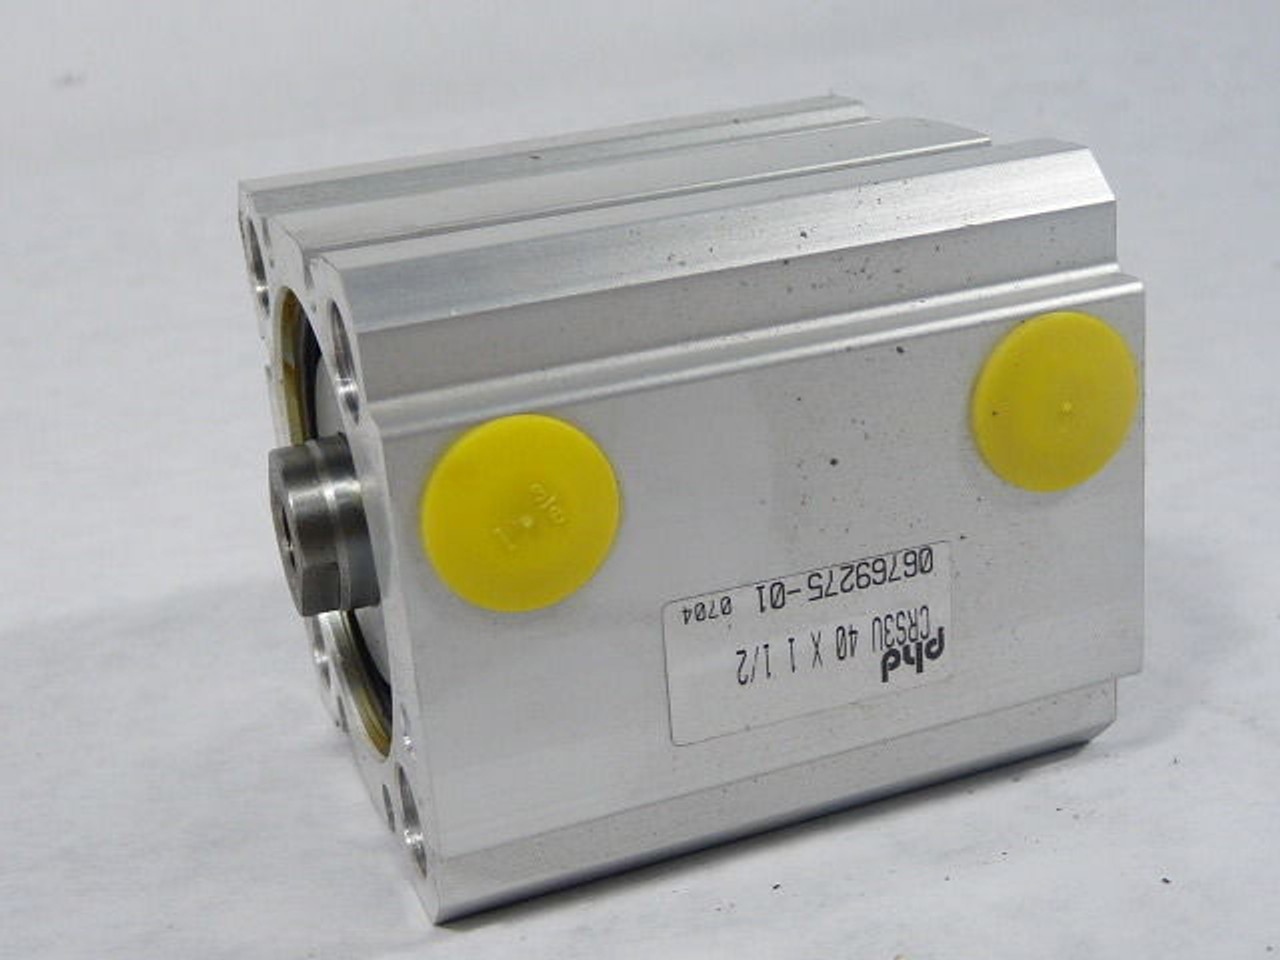 Phd CRS3U40x1-1/2 Compact Pneumatic Cylinder 40mm Bore 1-1/2 USED